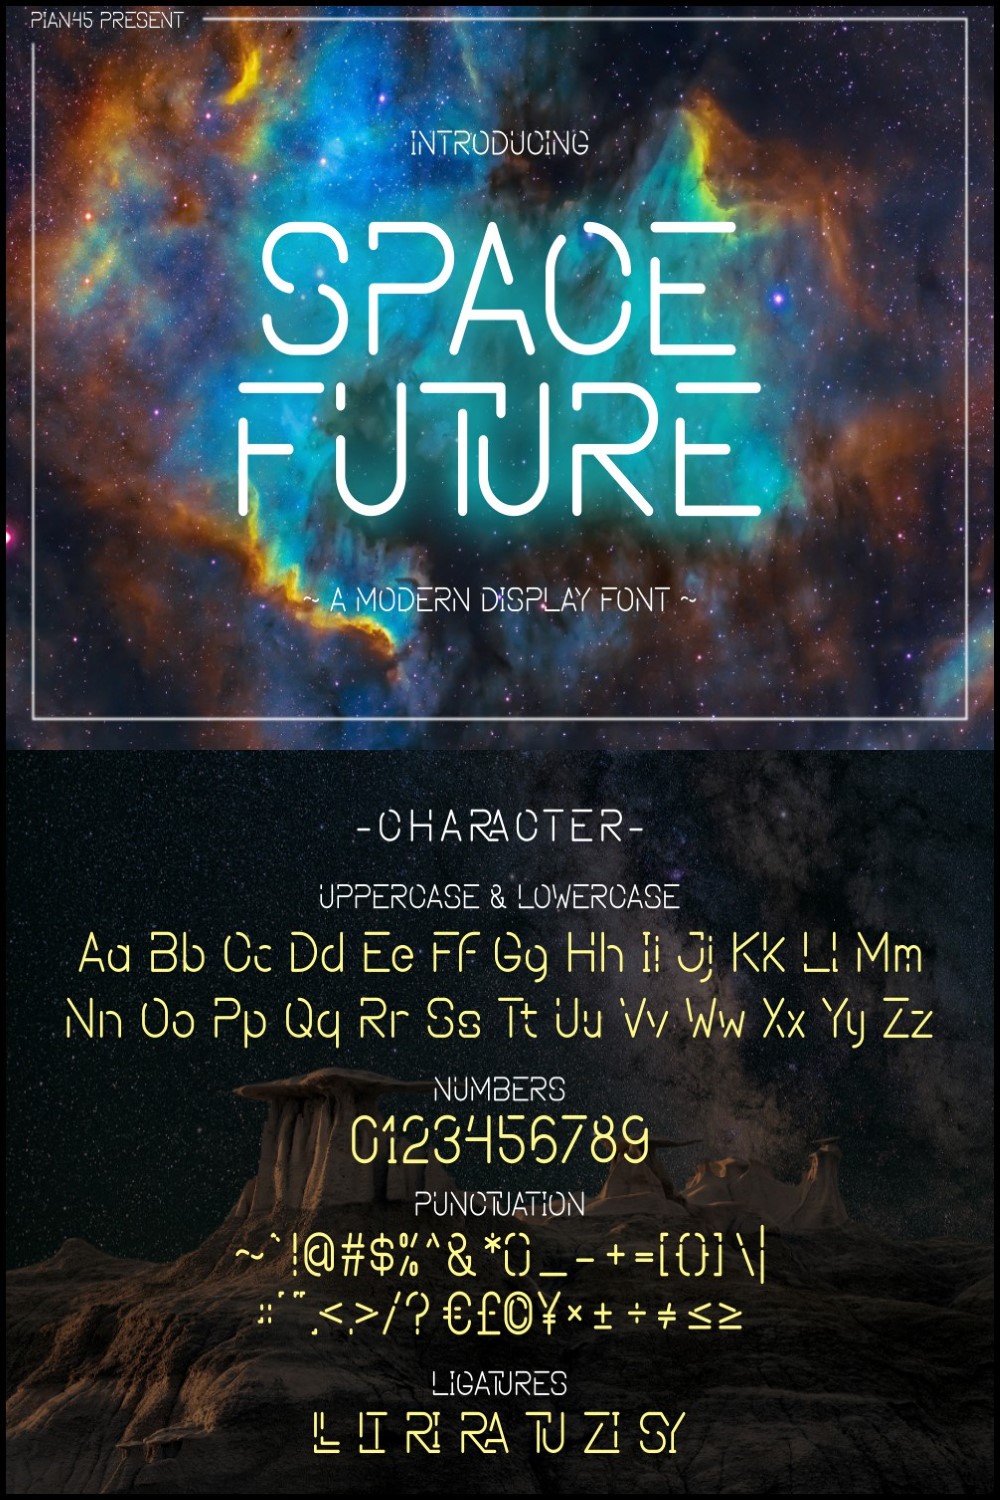 Space Future - Modern Futuristic Display Font pinterest preview image.